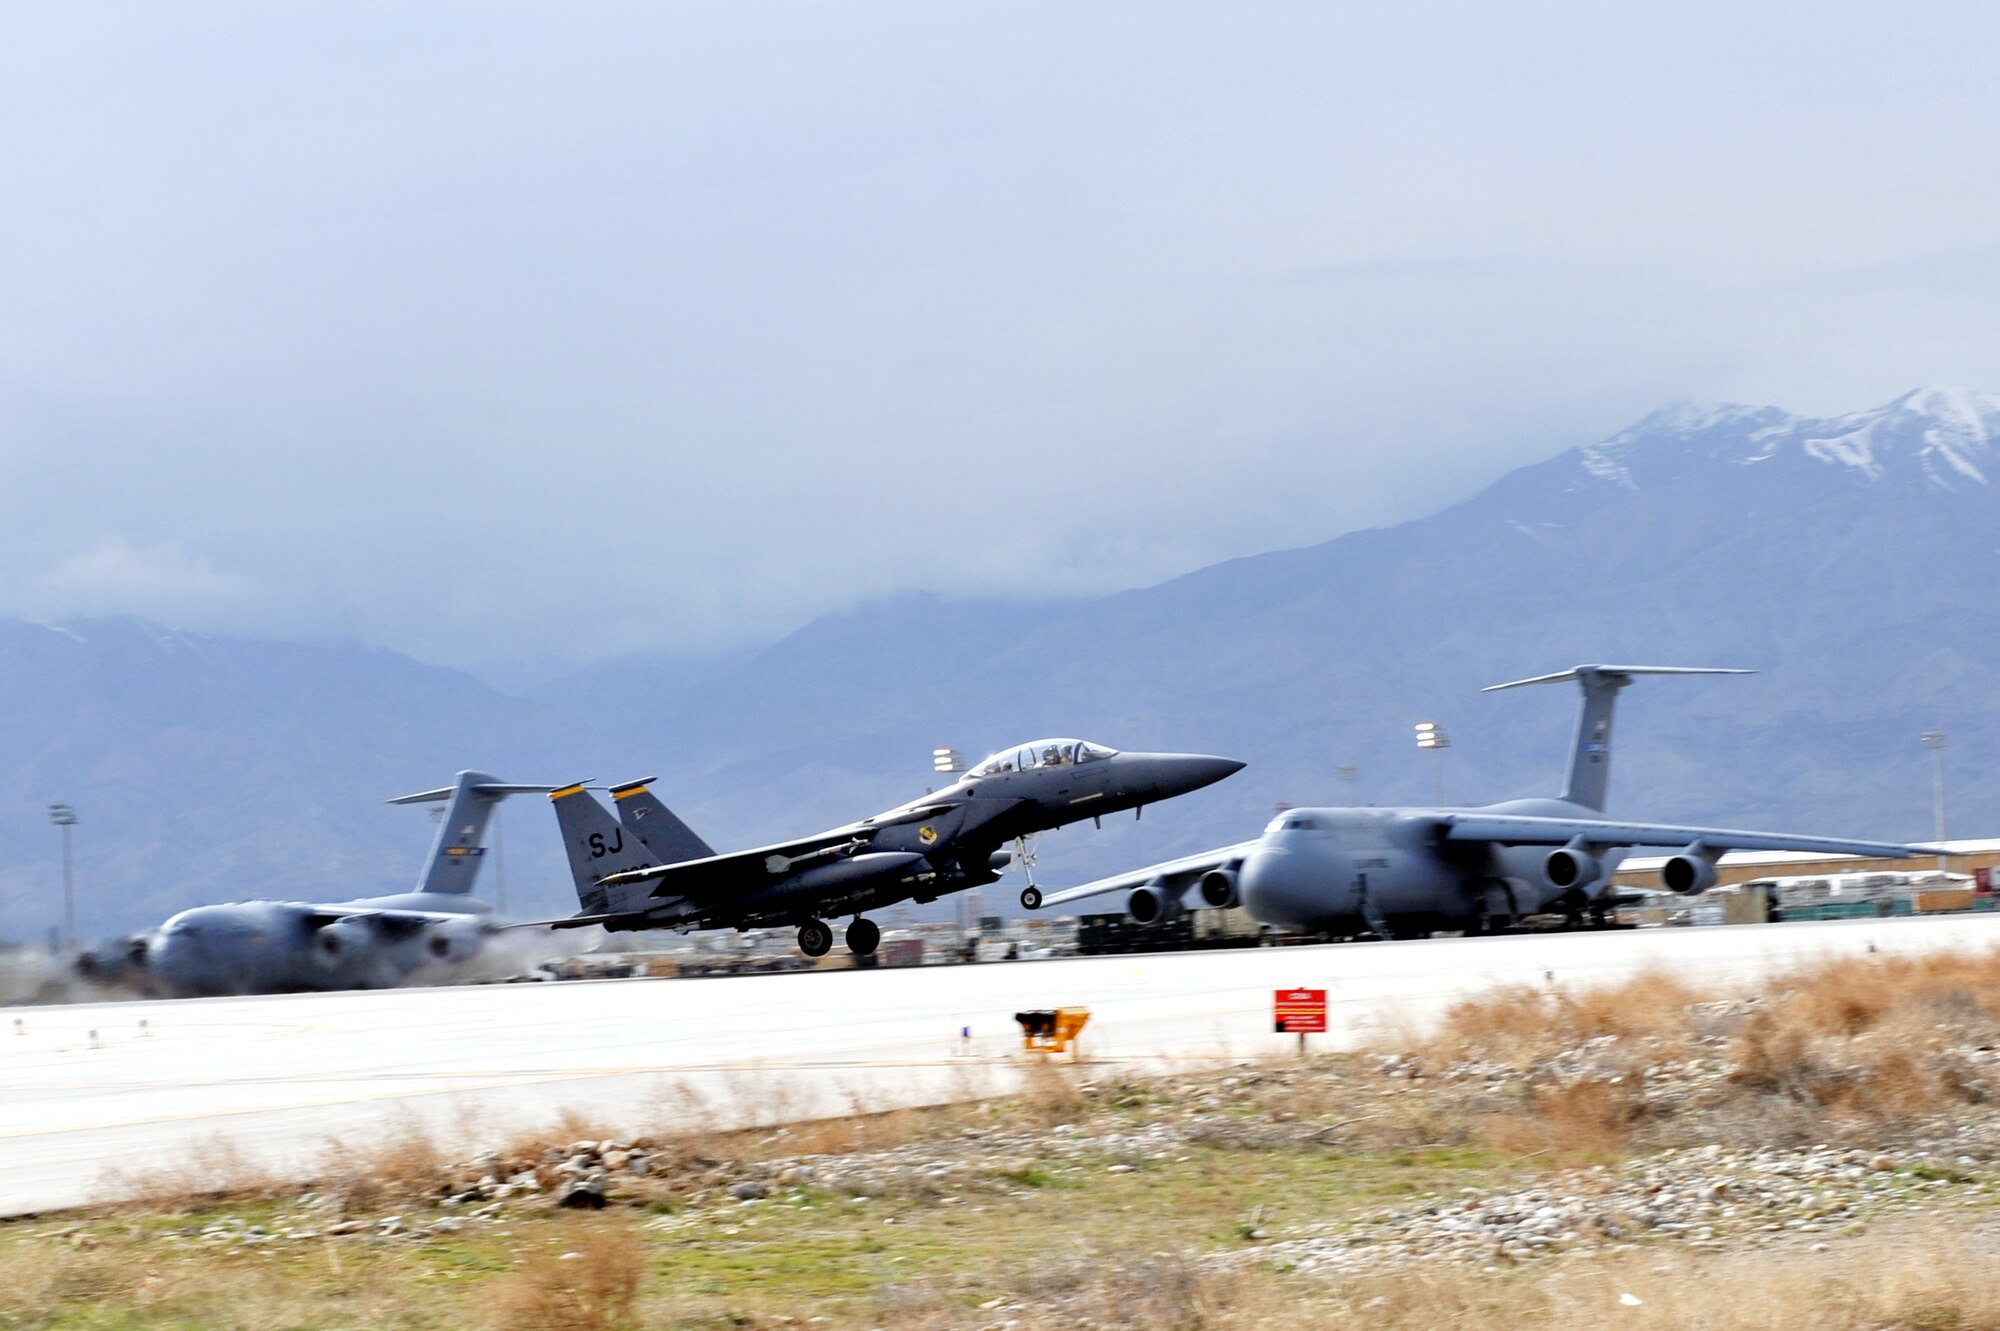 Maj. Tracy Schmidt, 389th Expeditionary Fighter Squadron F-15E Strike Eagle pilot, and Capt. Kimberly Volk, weapons system officer, takes off at Bagram Airfield, Afghanistan, March 29, 2011. (U.S. Air Force photo by Senior Airman Sheila deVera)